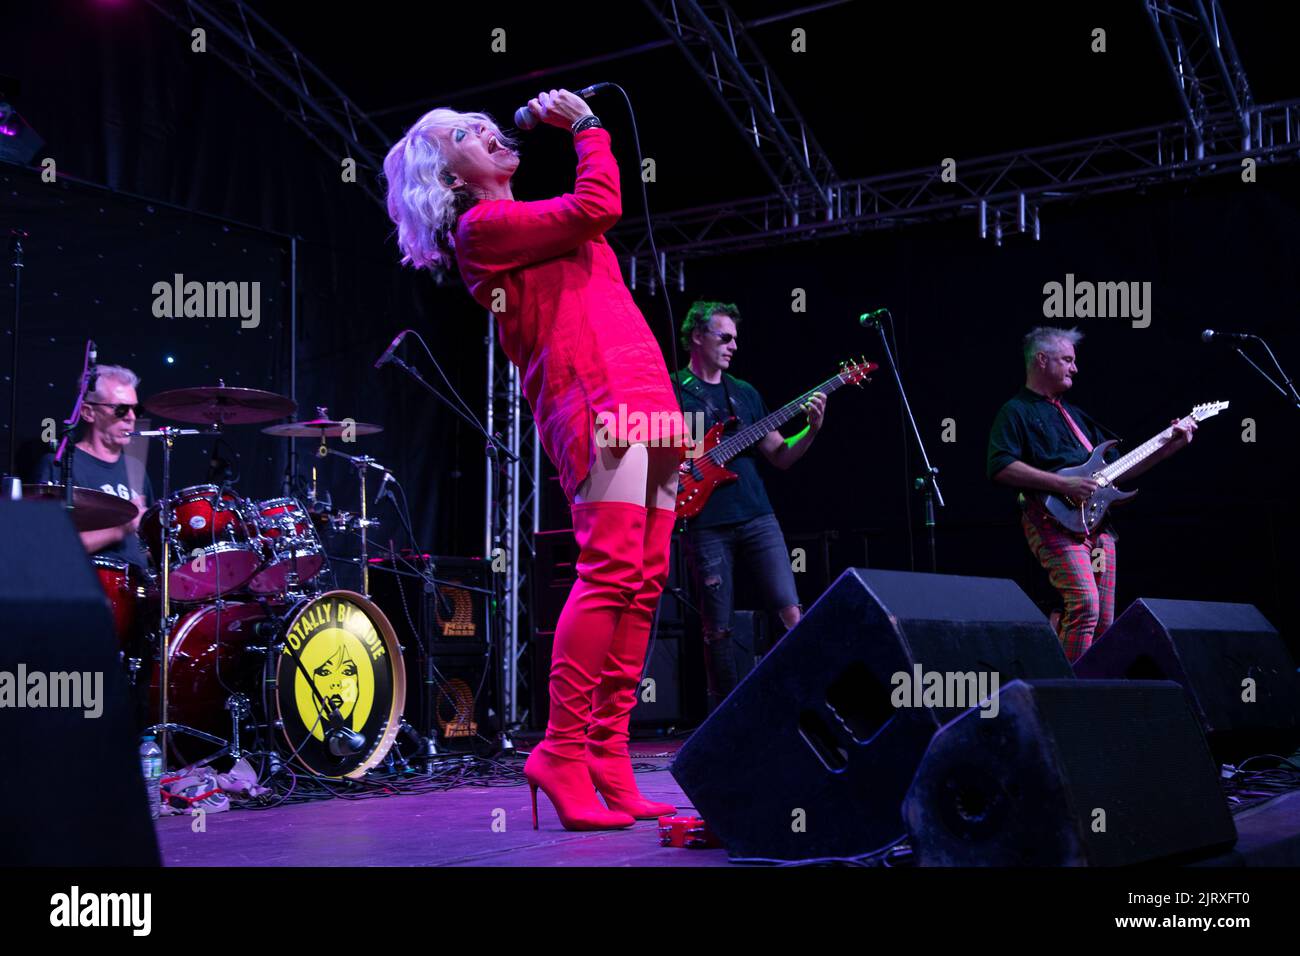 Abington Park, UK. 26th August 2022. Northampton is playing host to several tribute acts for some of the world’s best know artists over the Bank holiday weekend, the event is organised by Showtime Events Group. Credit: Keith J Smith./Alamy Live News. Stock Photo